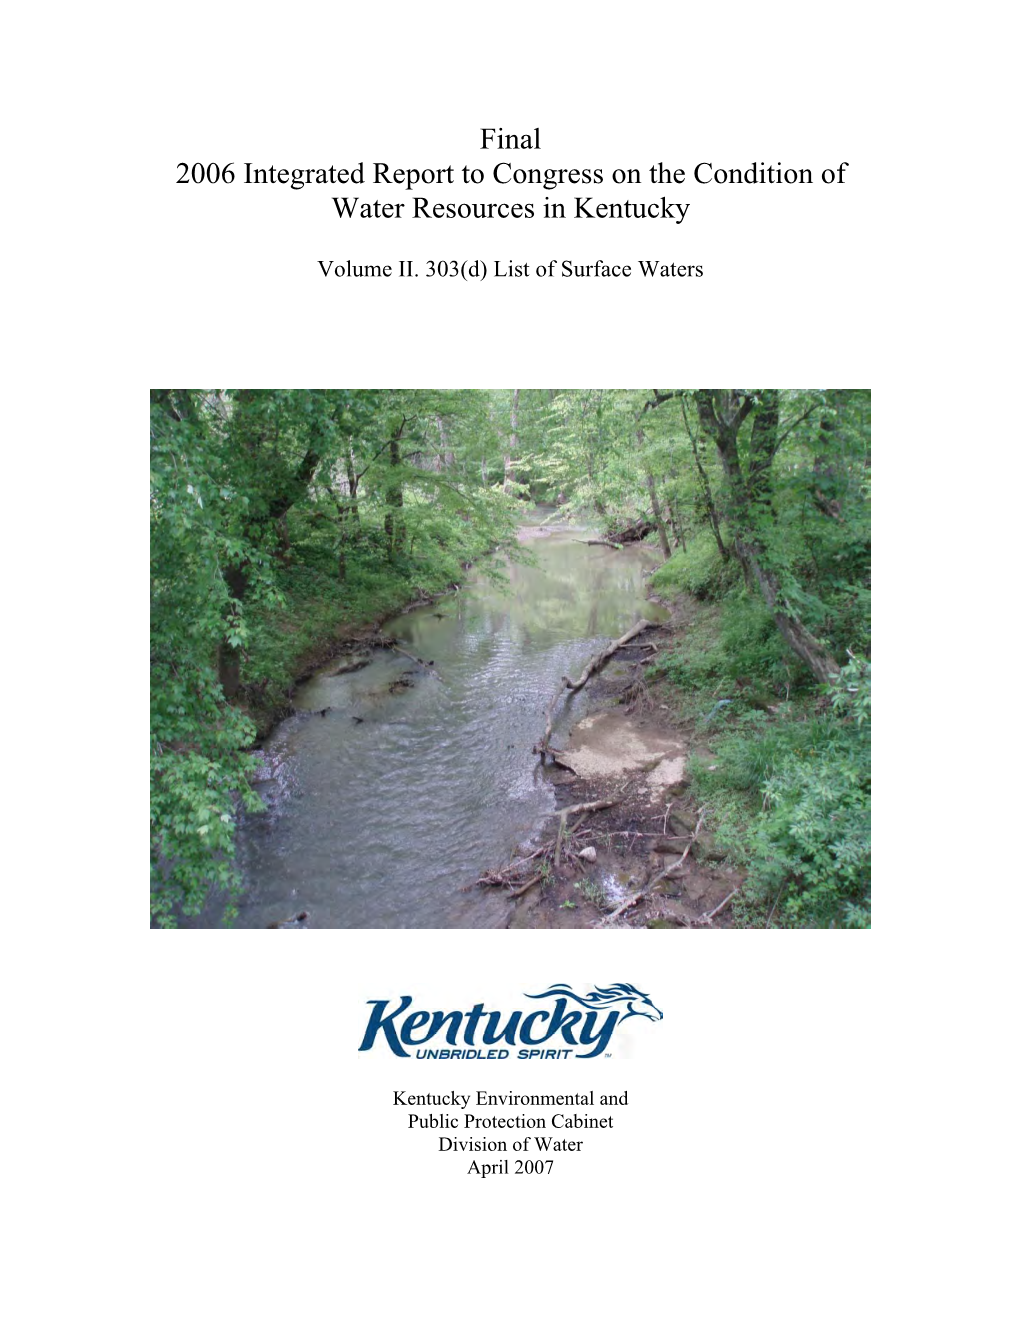 Final 2006 Integrated Report to Congress on the Condition of Water Resources in Kentucky